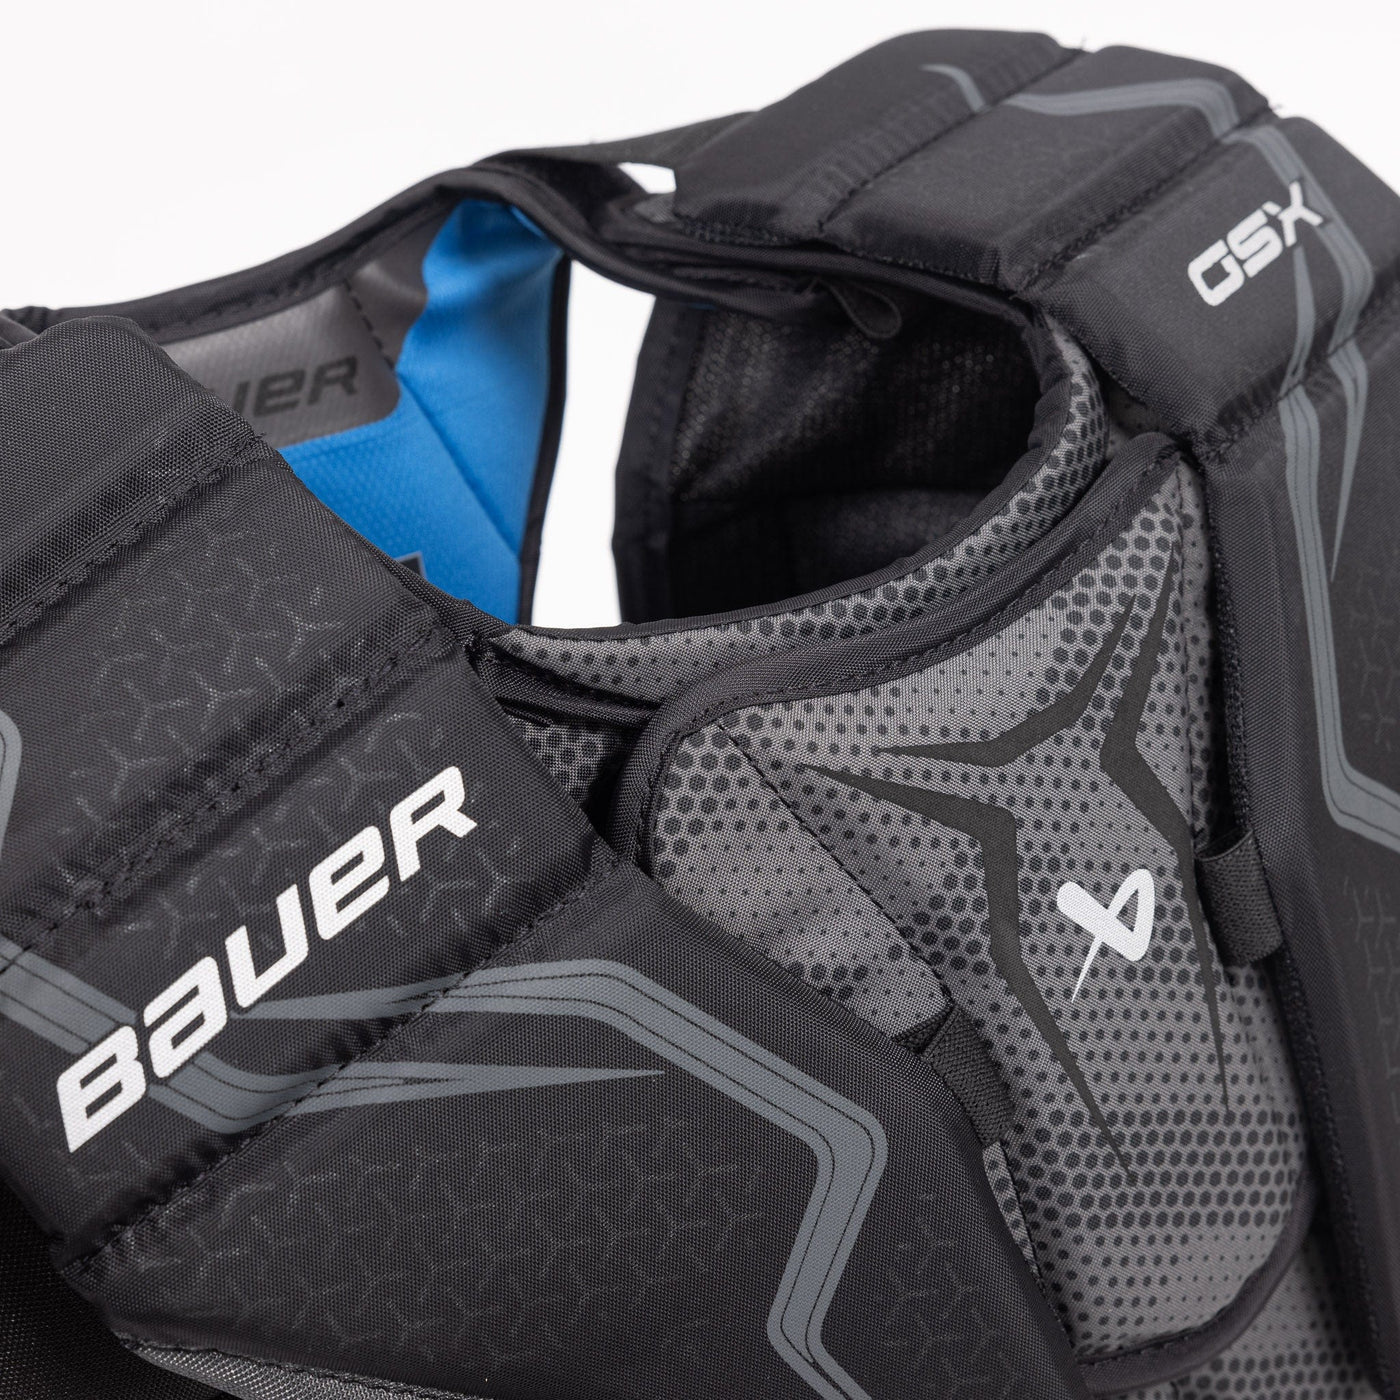 Bauer GSX Junior Chest & Arm Protector S23 - The Hockey Shop Source For Sports